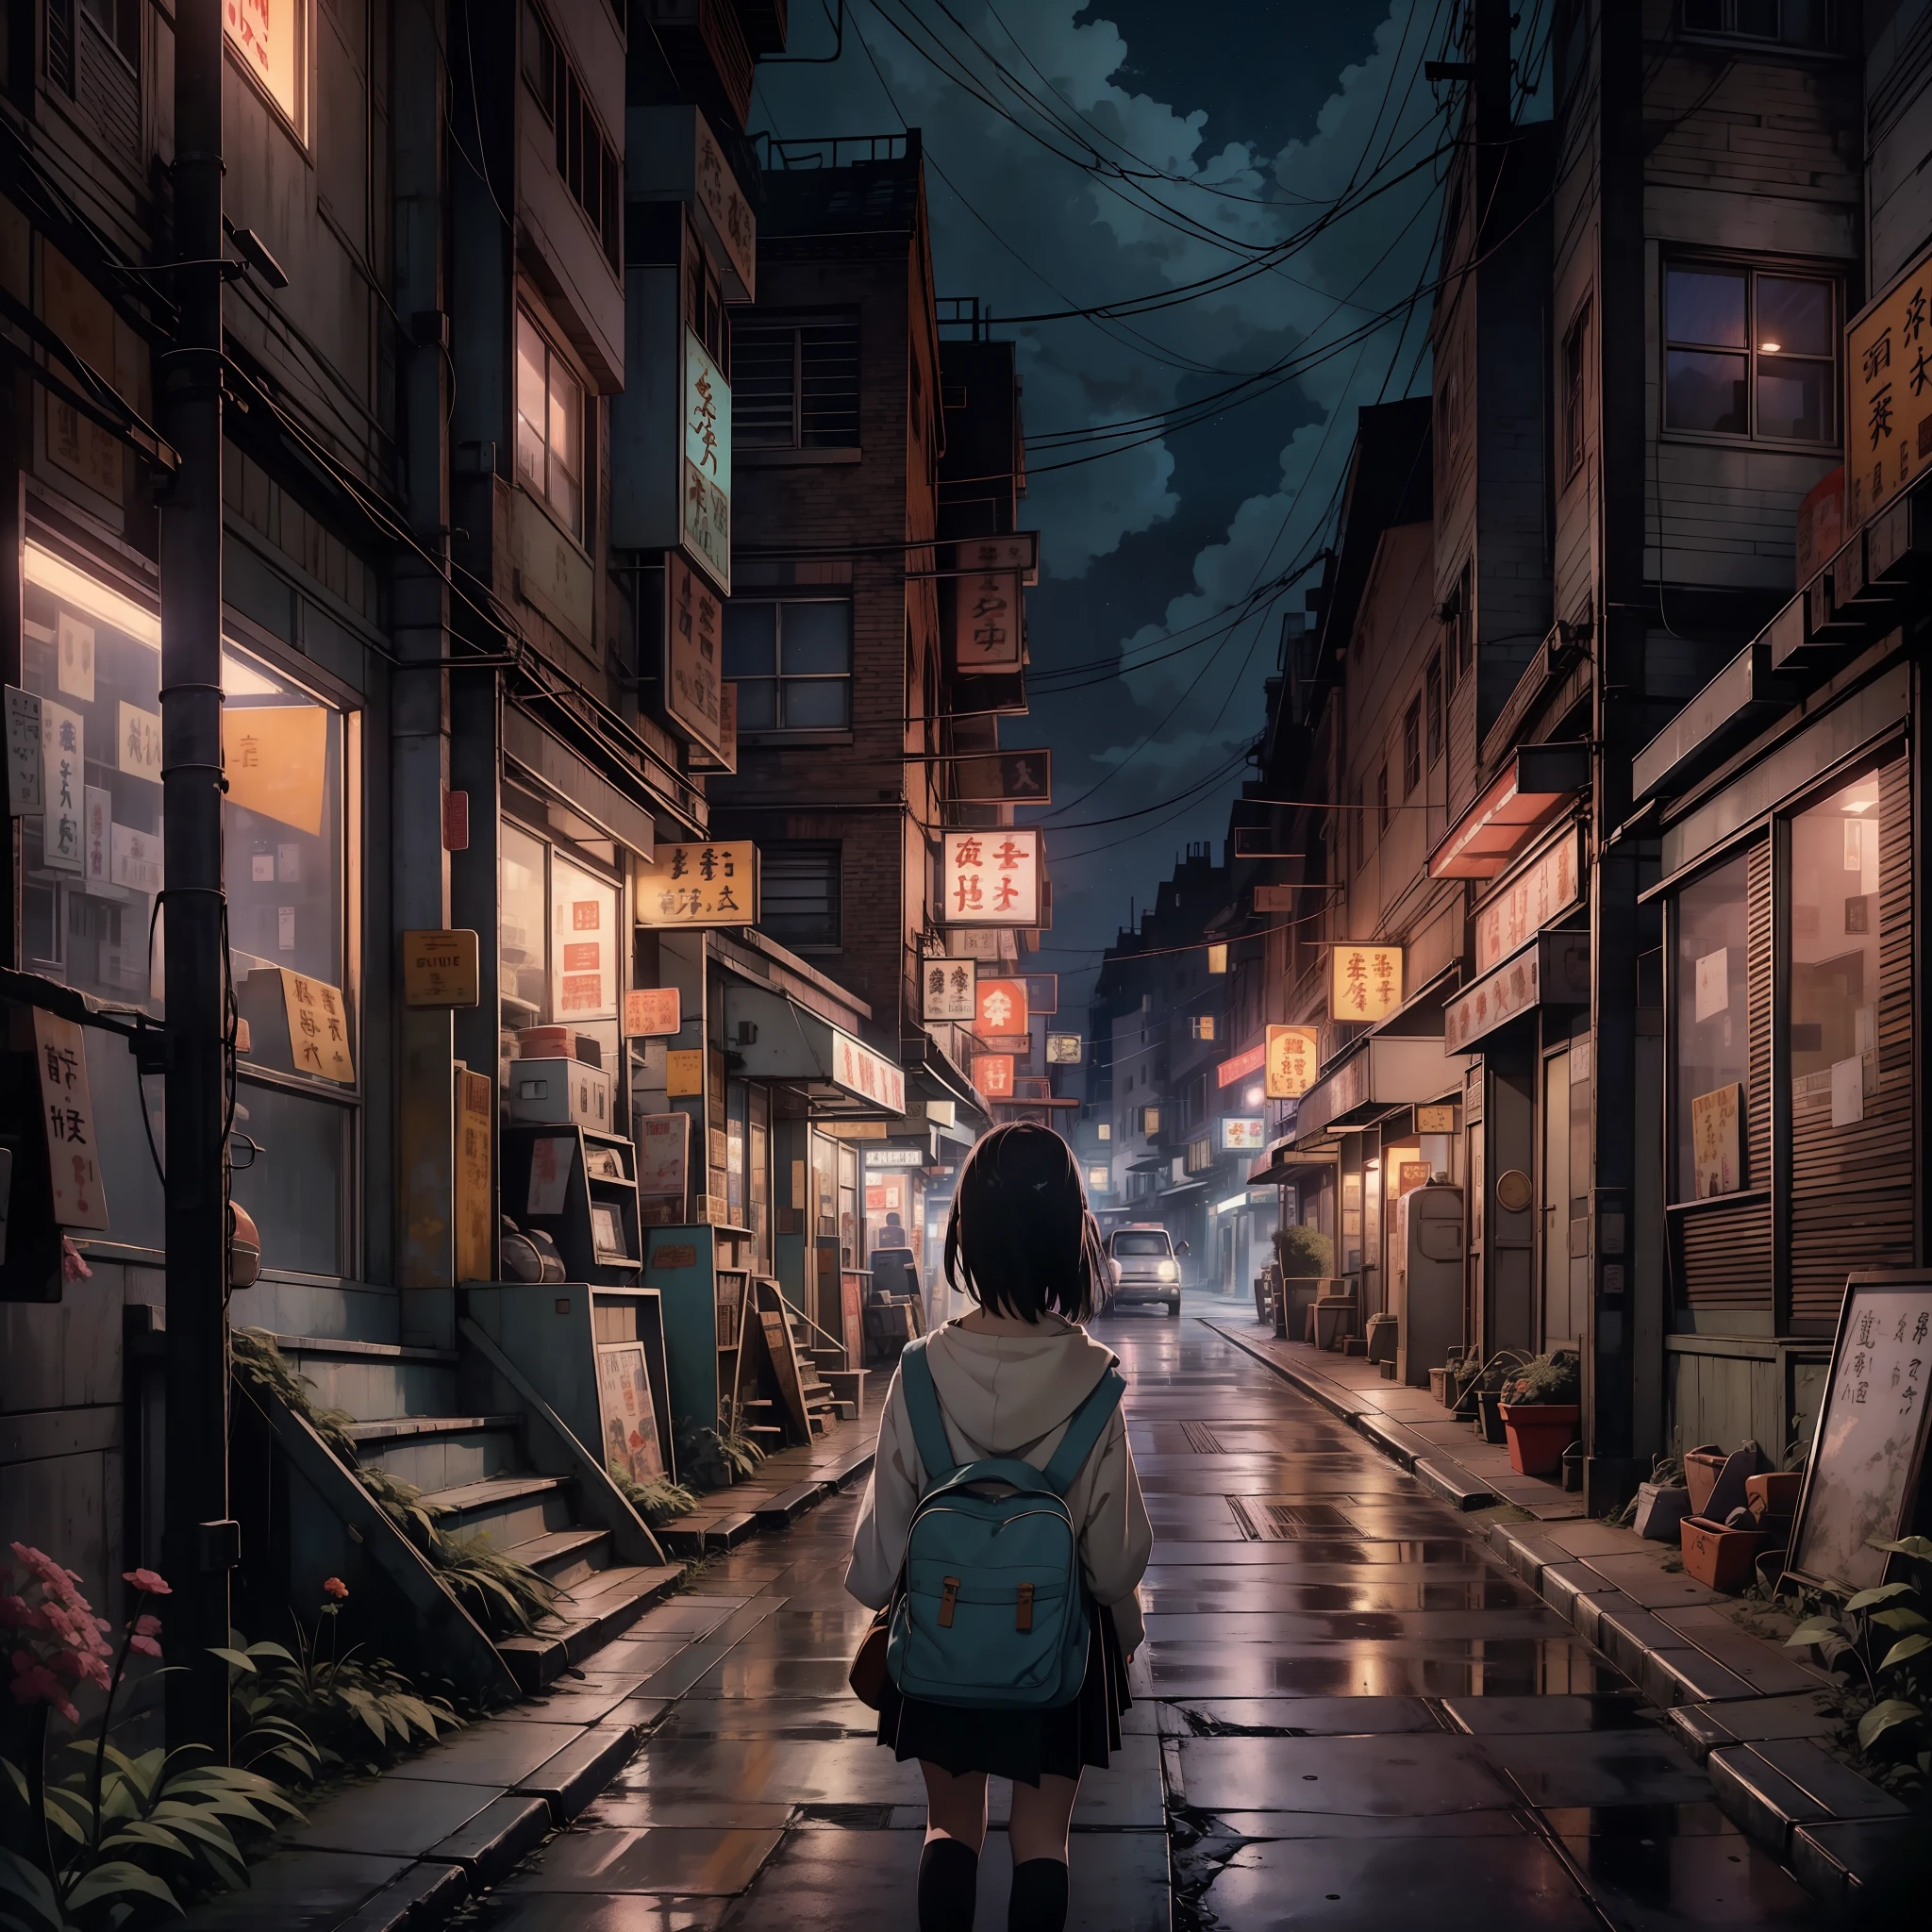 A nostalgic digital painting inspired by the enchanting world of Studio Ghibli. The artwork depicts a charming, small-town street at night, exuding a sense of tranquility and wonder. The scene is set for a cinematic moment, reminiscent of a scene from a Ghibli film. In the composition, a solitary junior high school girl stands in contemplation, her back turned to the viewer, emanating a touch of melancholy. The world around her is beautifully detailed, capturing the essence of a nostalgic atmosphere. The sky above is adorned with a breathtaking display of stars, evoking a feeling of wistful reminiscence that resonates with viewers of all ages.